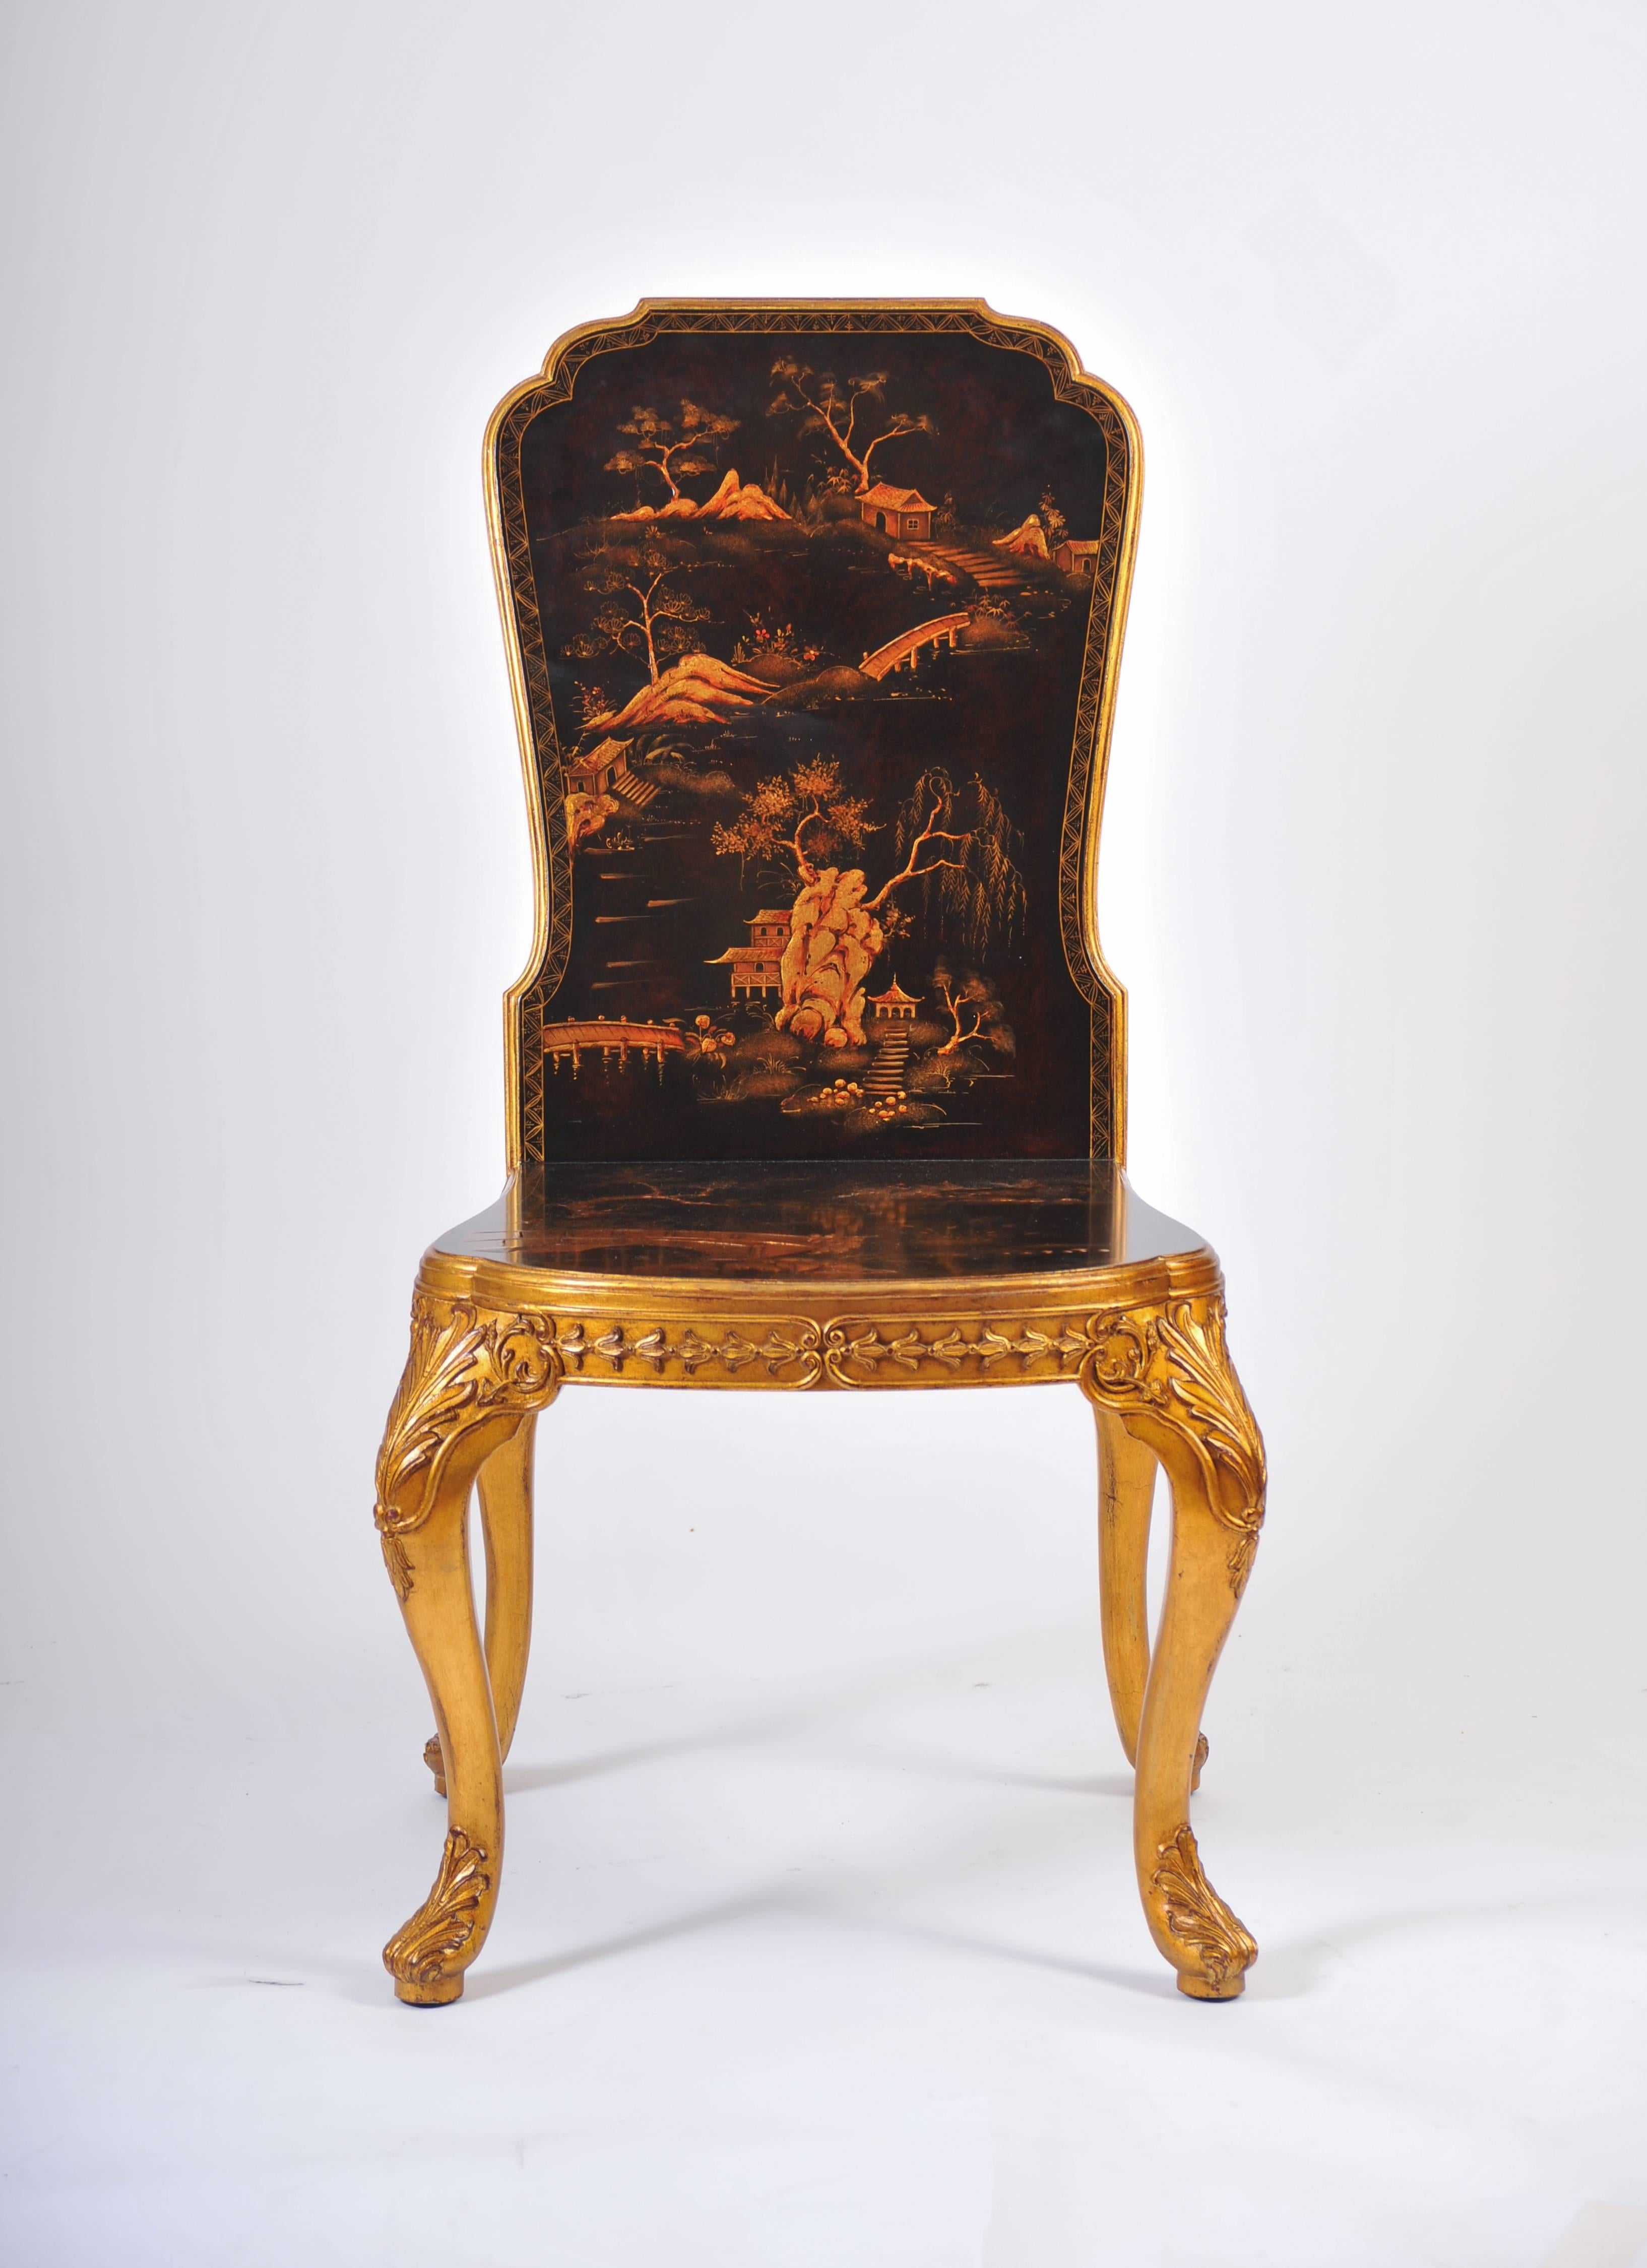 This beautiful and very ornate pair of 18th century style chinoiserie hall chairs feature gilded cabriole legs with acanthus leaf detailing. The chairs depict various outdoor oriental scenes on both the front and back of the chair as well as the